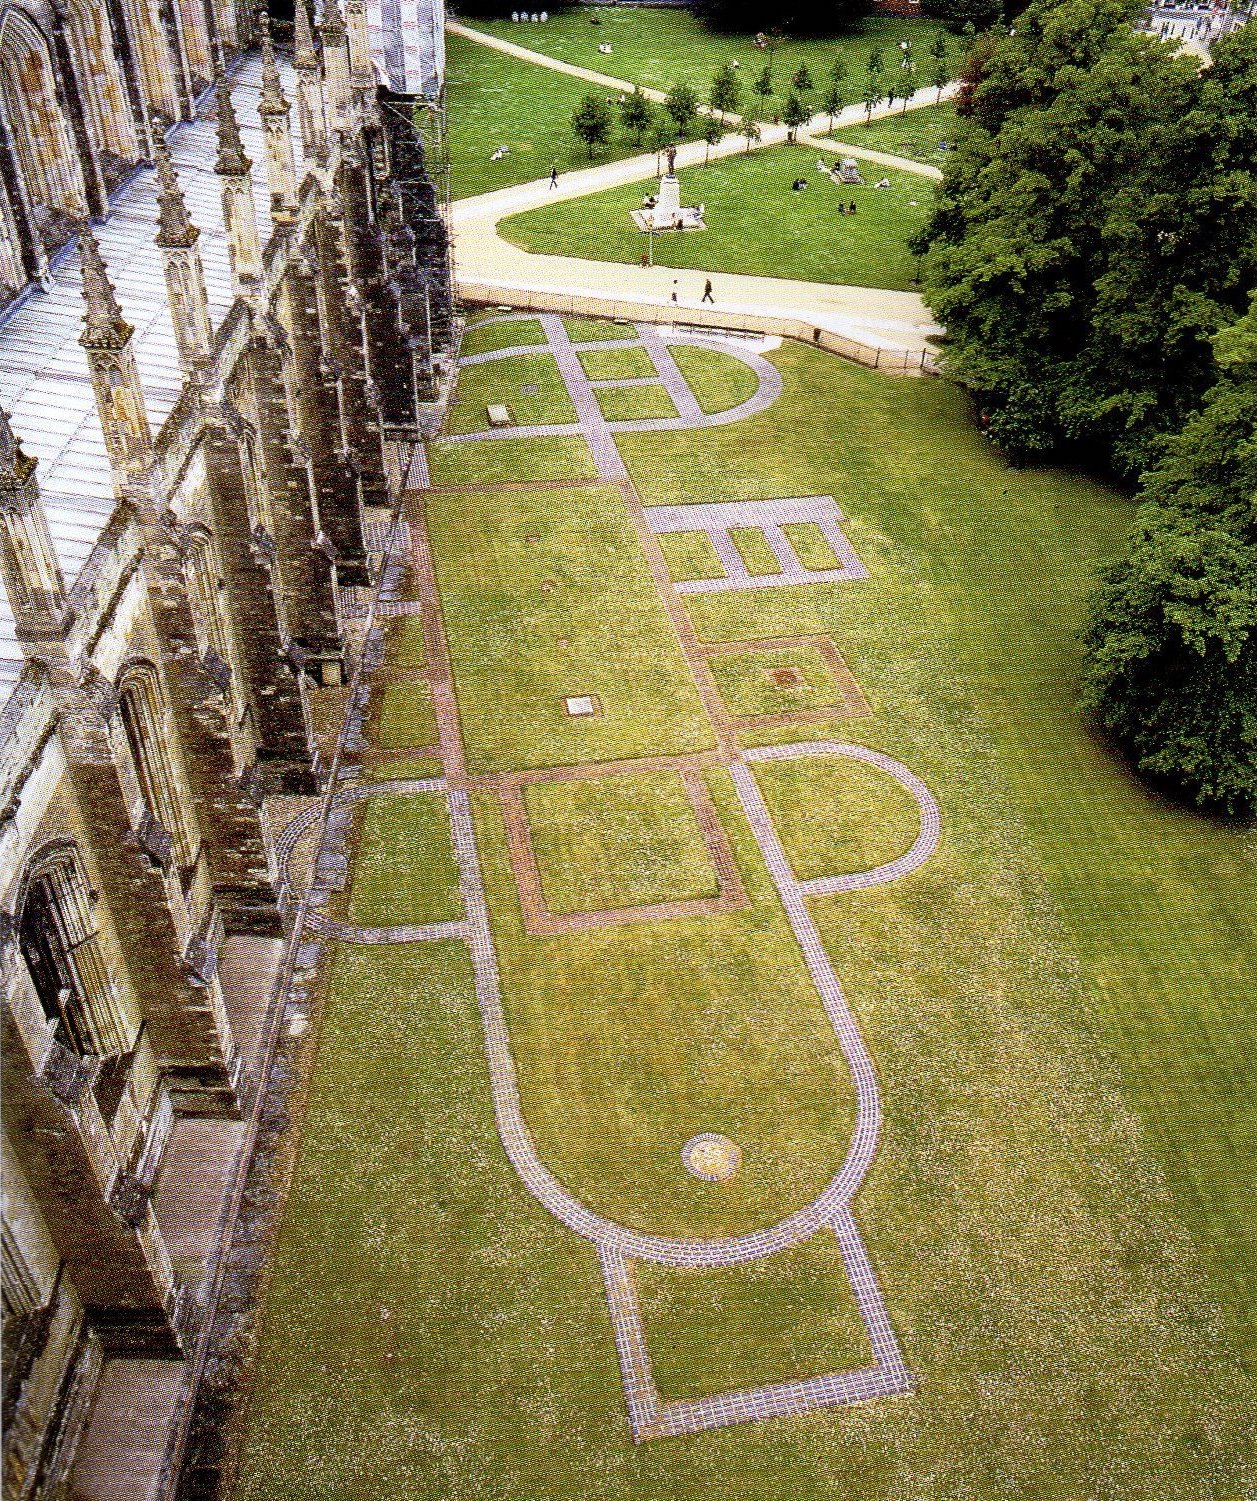 Jutting out from the side of the Winchester Cathedral is the tile outline of the Old Minster of Winchester. The two structures share an apse, but the Old Minster tile outline shows where the original rooms would have been located. The outline is vaguely cruciform, and the altar lies on the side closest to the viewer.